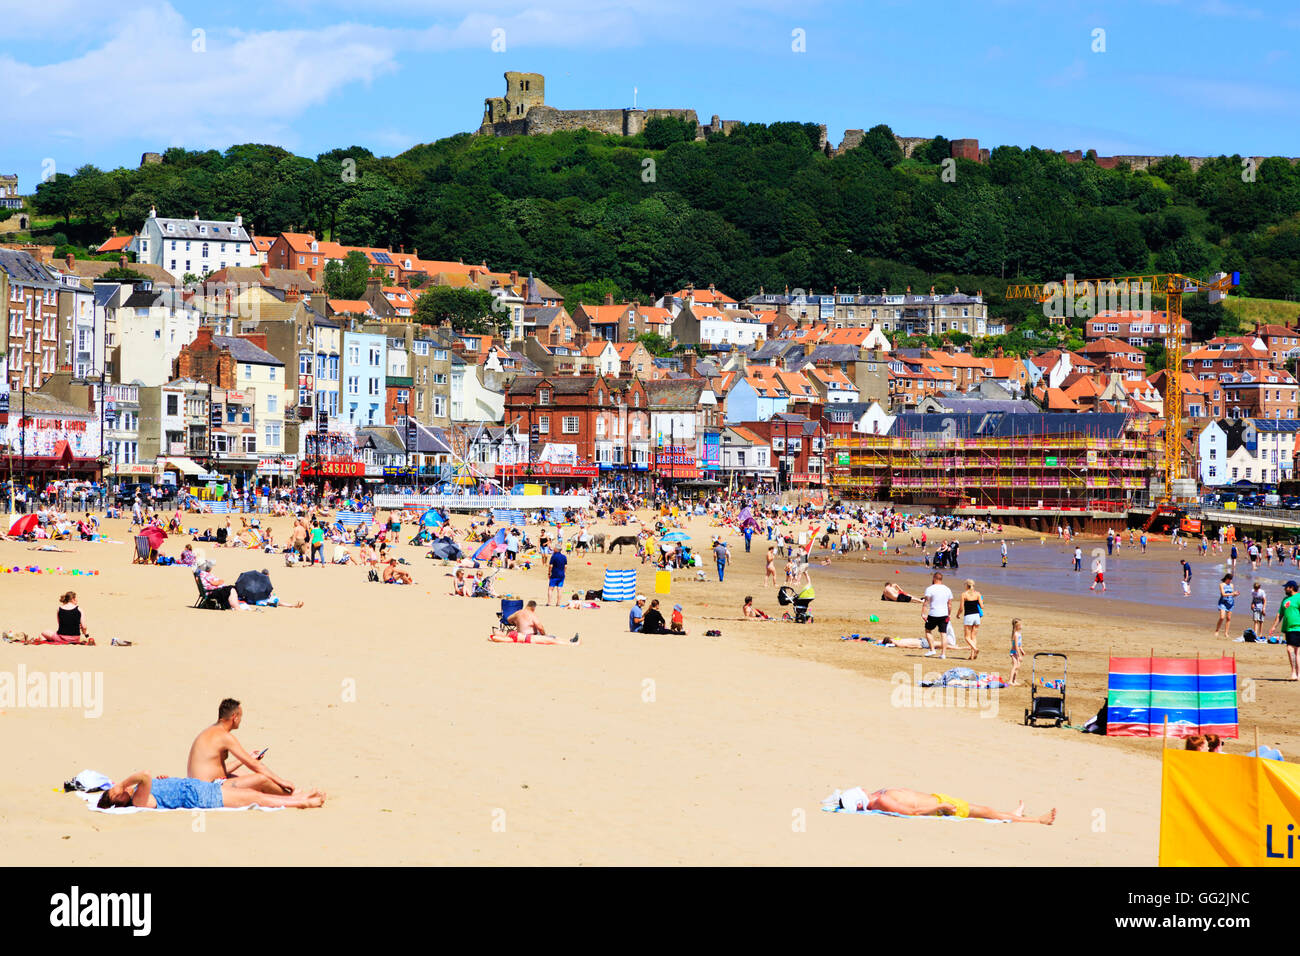 Busy summers day on the beach at Scarborough, North Yorkshire, England. Stock Photo